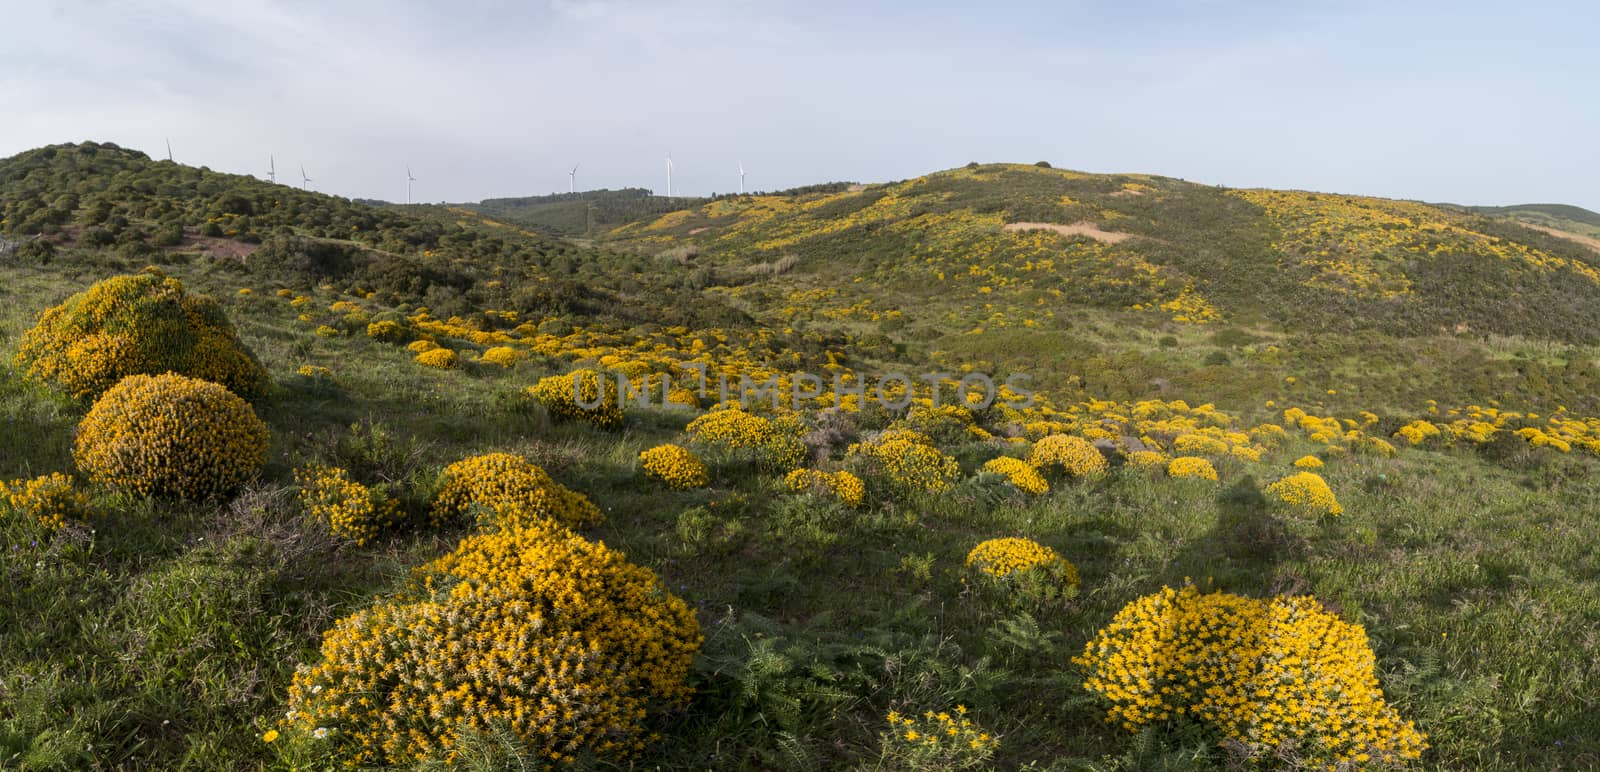 Typical and beautiful landscape with ulex densus shrubs on the Sagres, Portugal region.